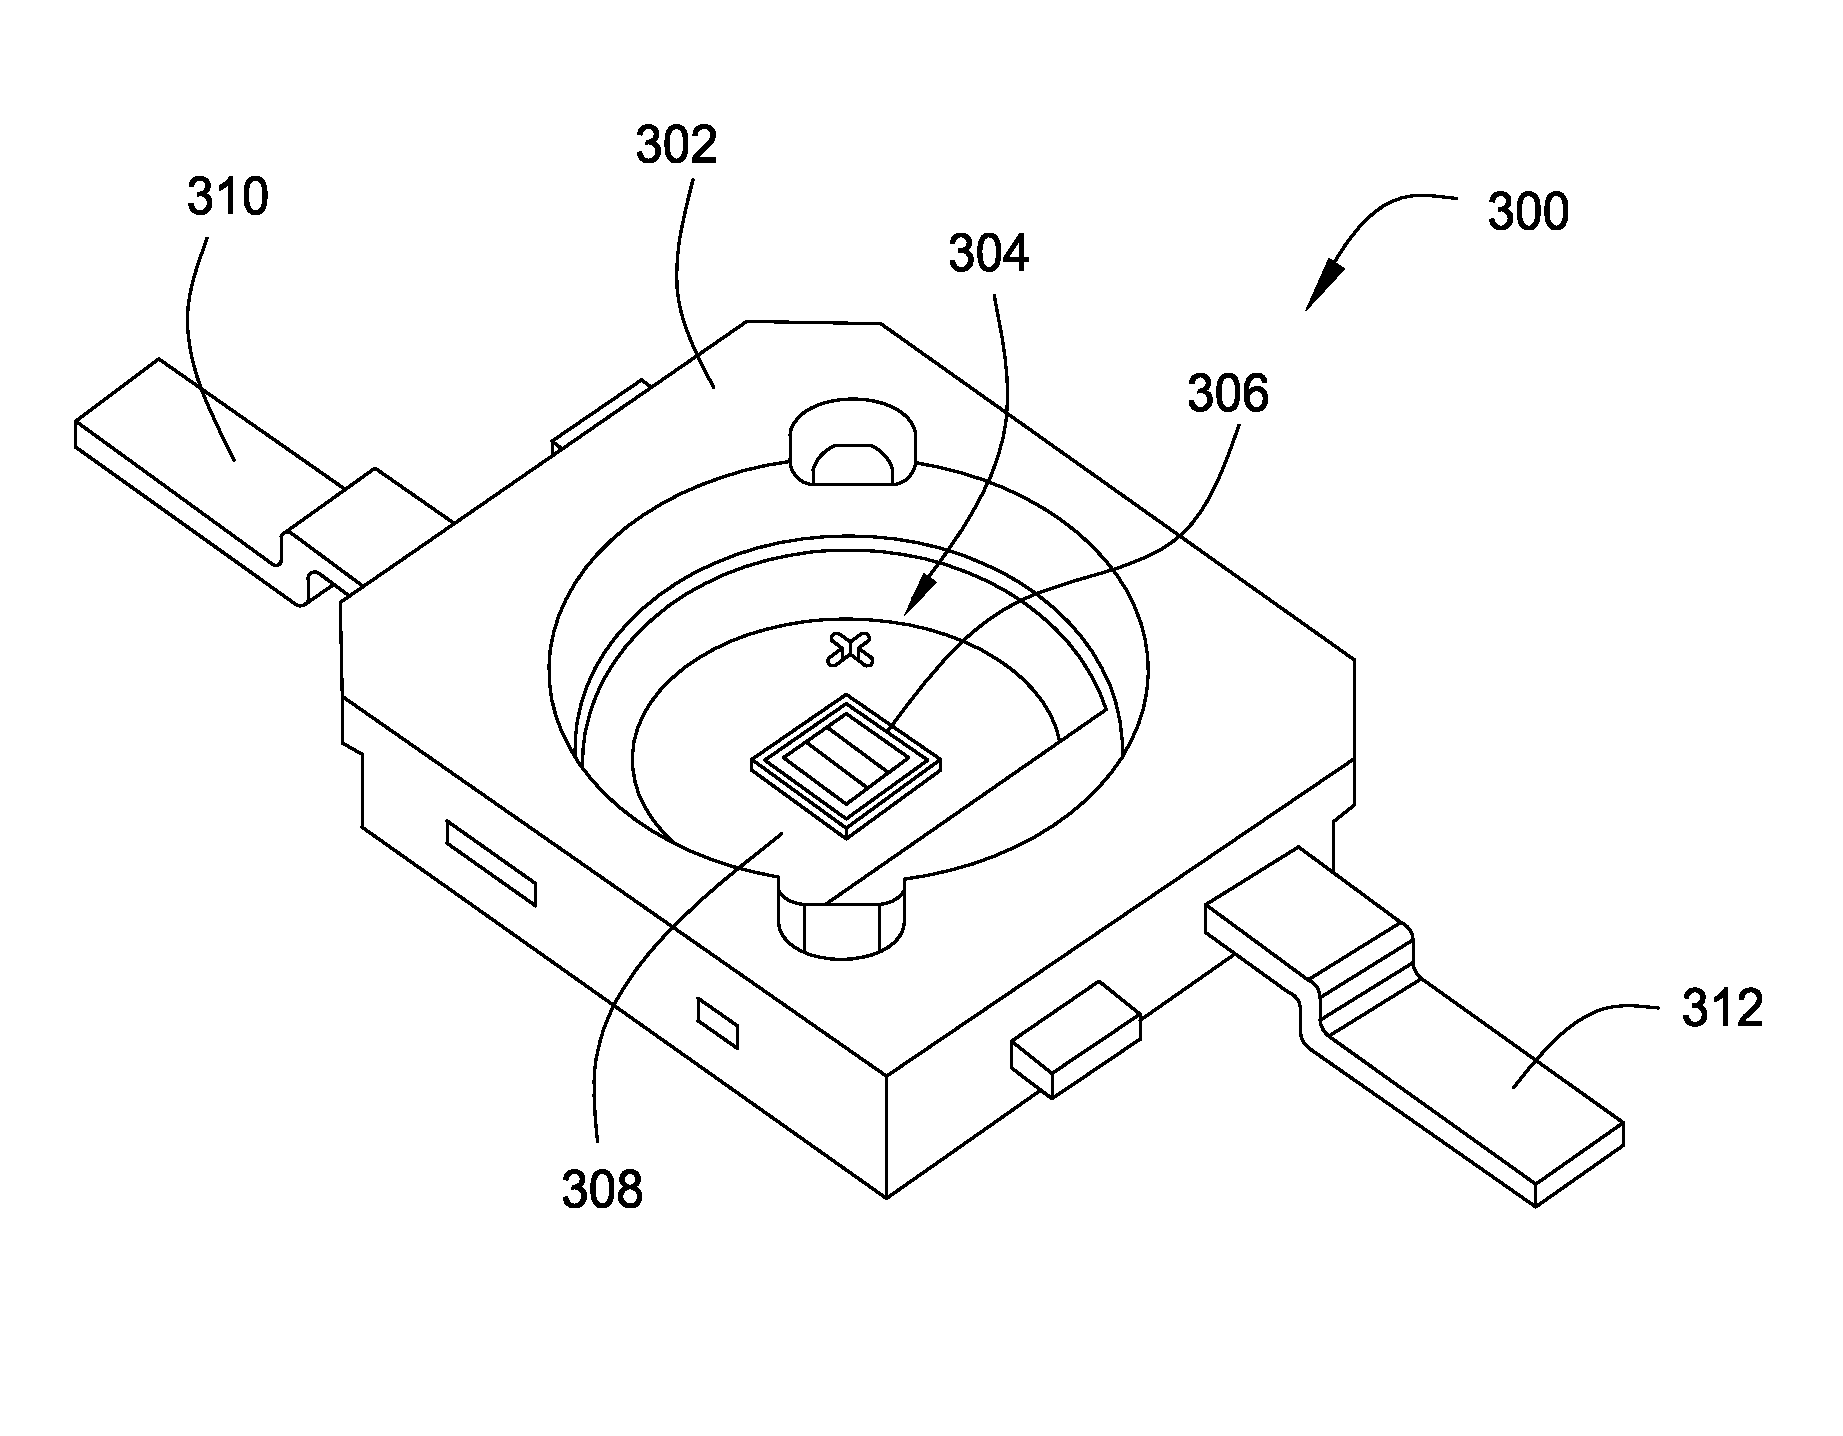 Solid state lighting system and maintenance method therein